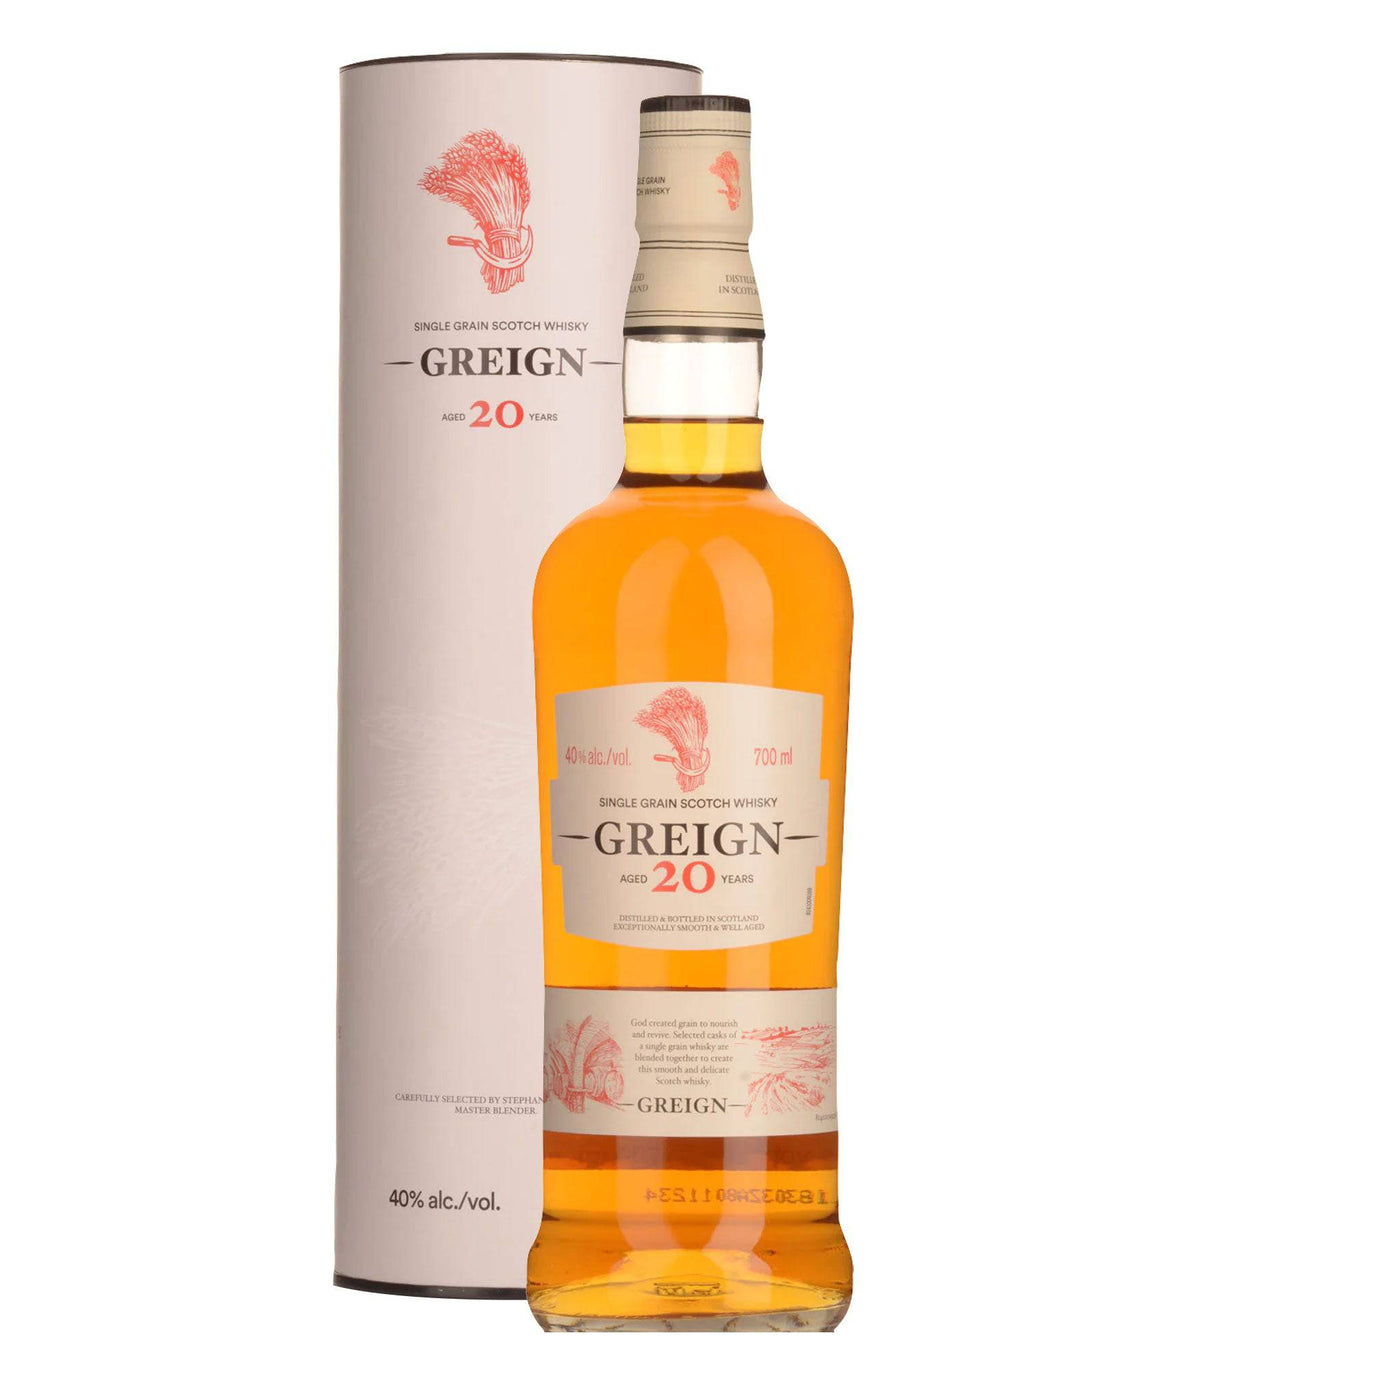 Greign 20 Years Whisky - Spiritly